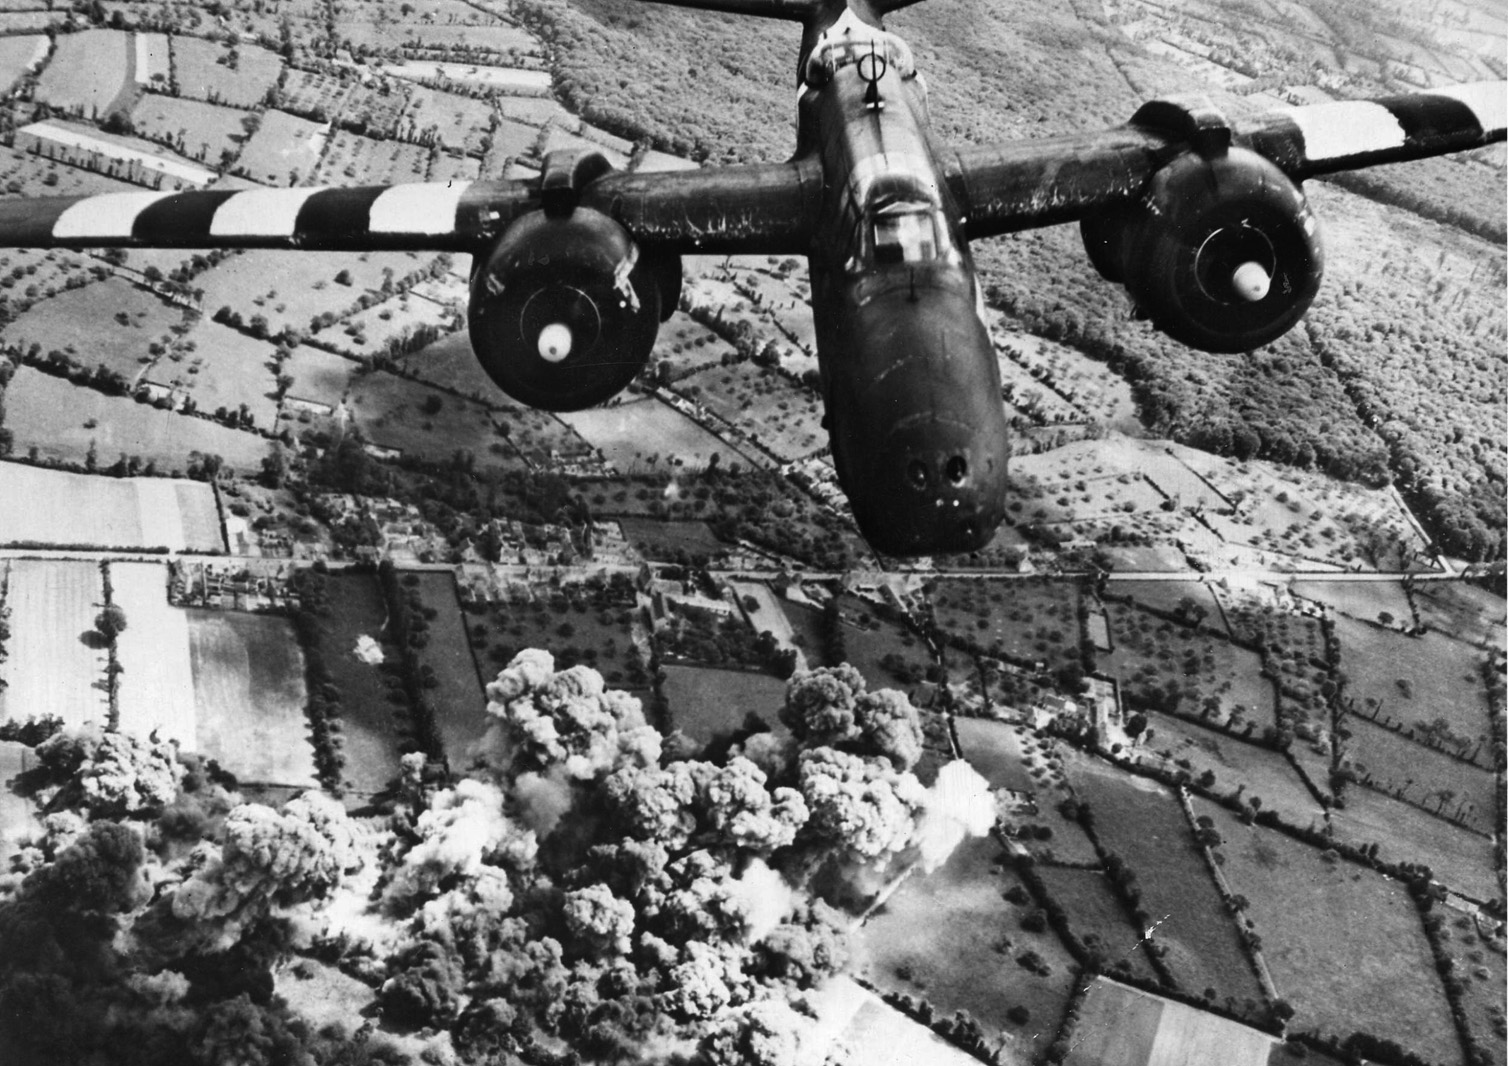 A Douglas A-20 Havoc light bomber of the U.S. Army Air Forces attacks German positions on the Cotentin Peninsula.